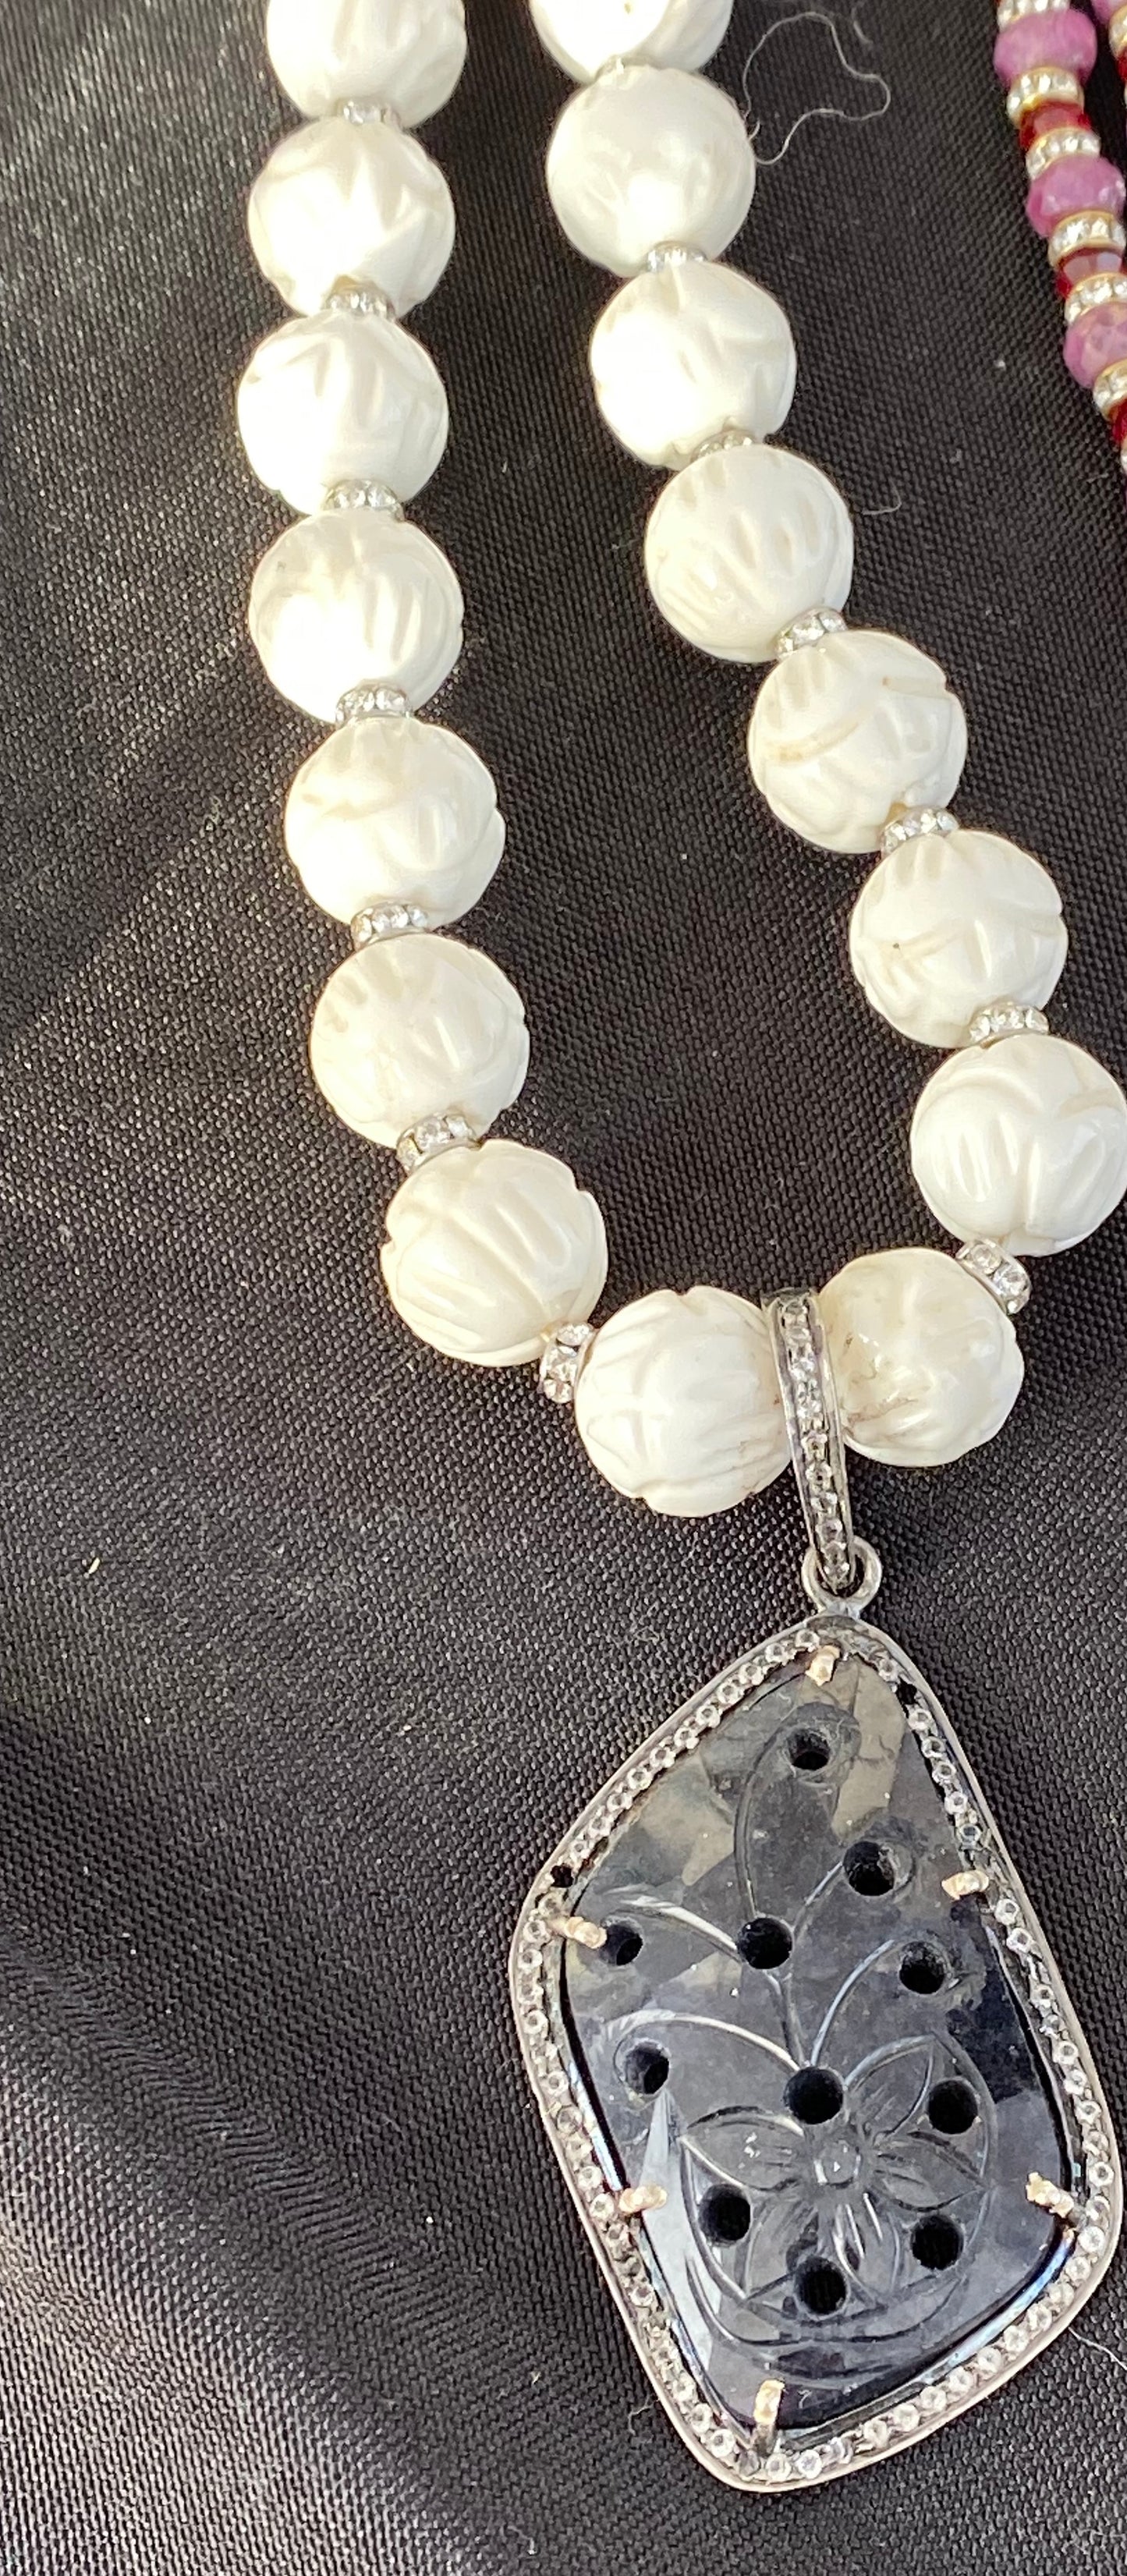 Carved Tridacna Shell and Swarovski Crystal Necklace with Carved Sapphire Pendant